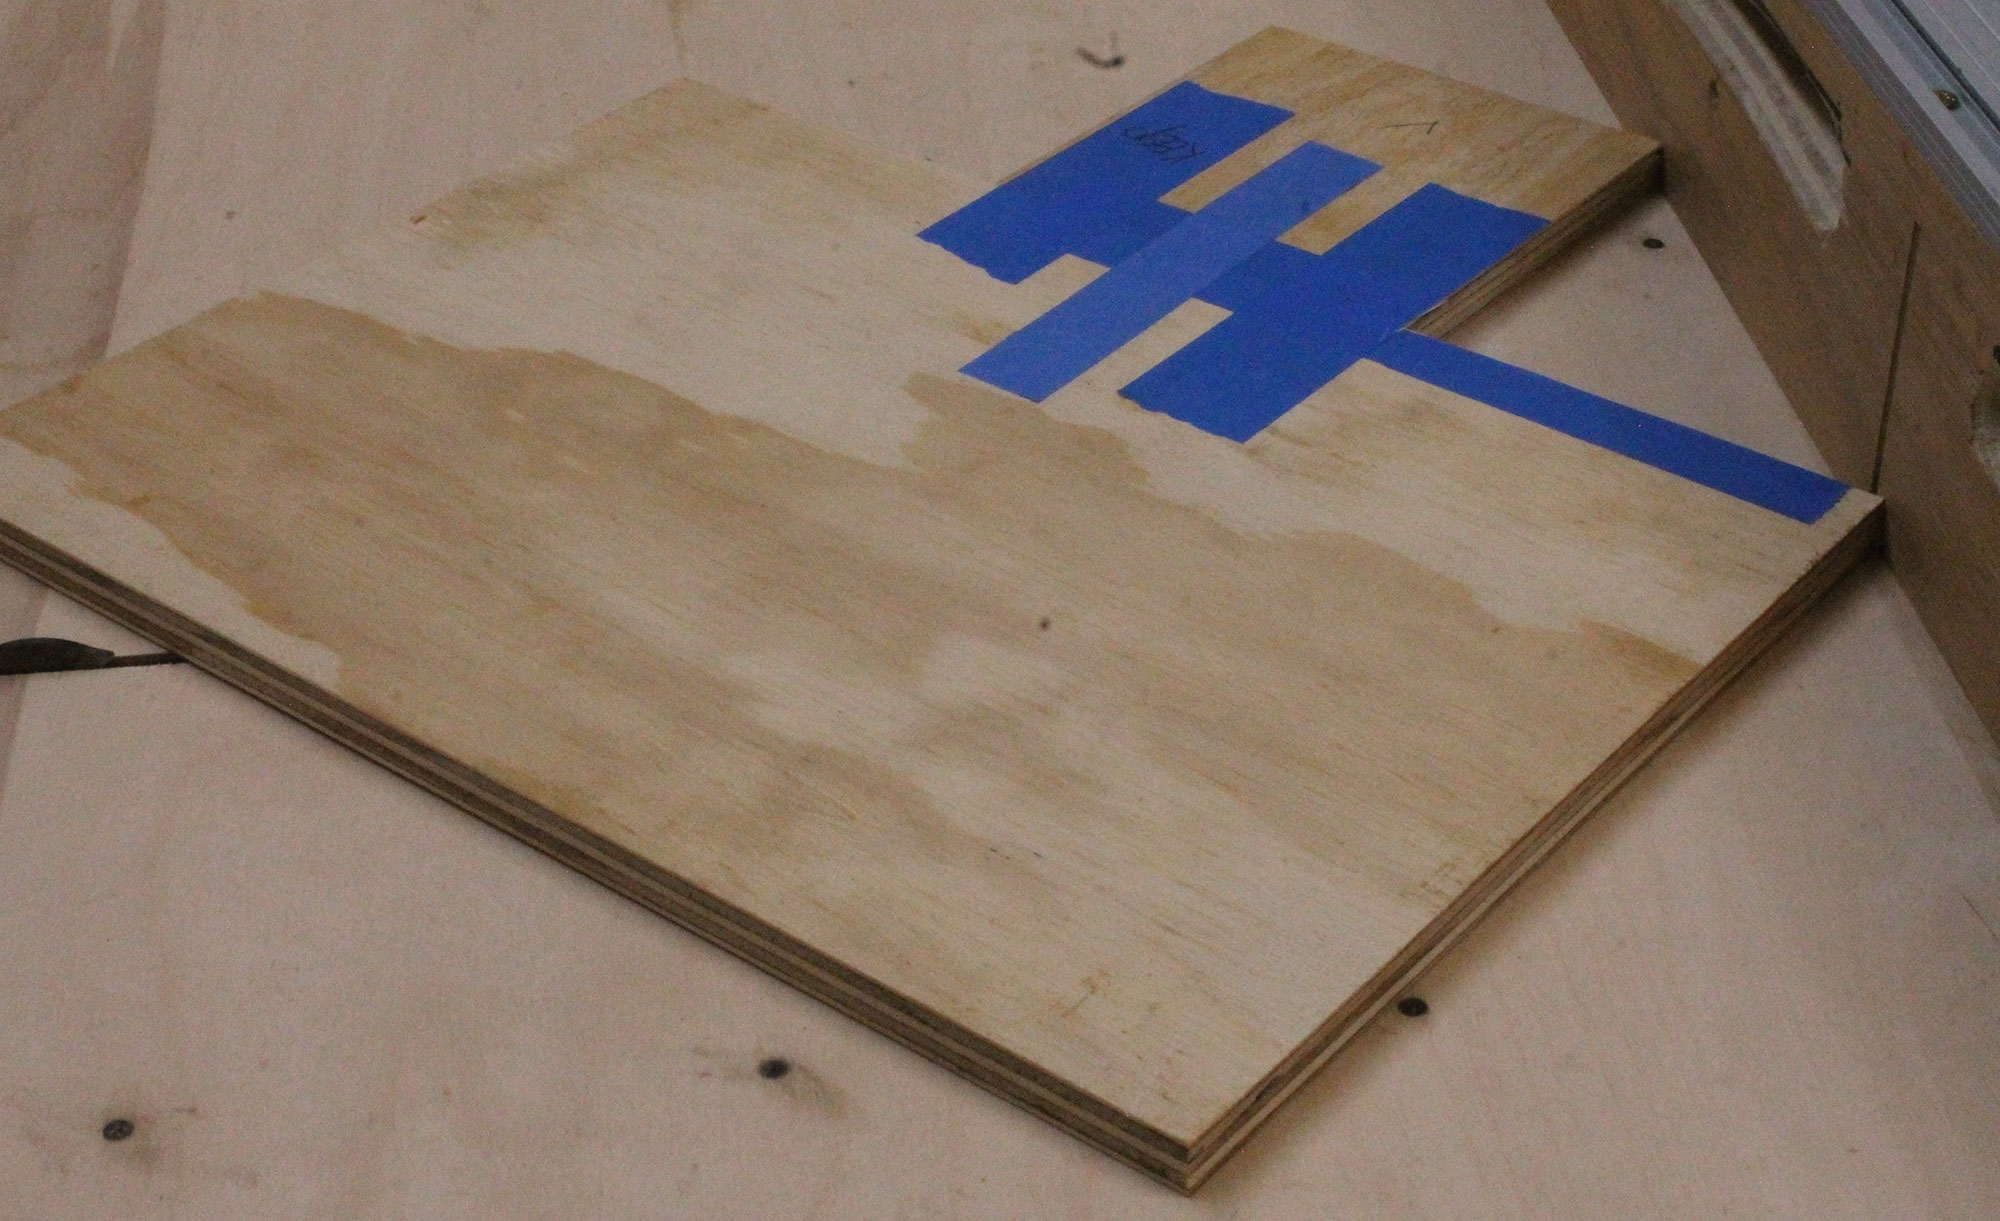 Photo 9 – Carefully place the taped board with its two corners against the sled’s fence.